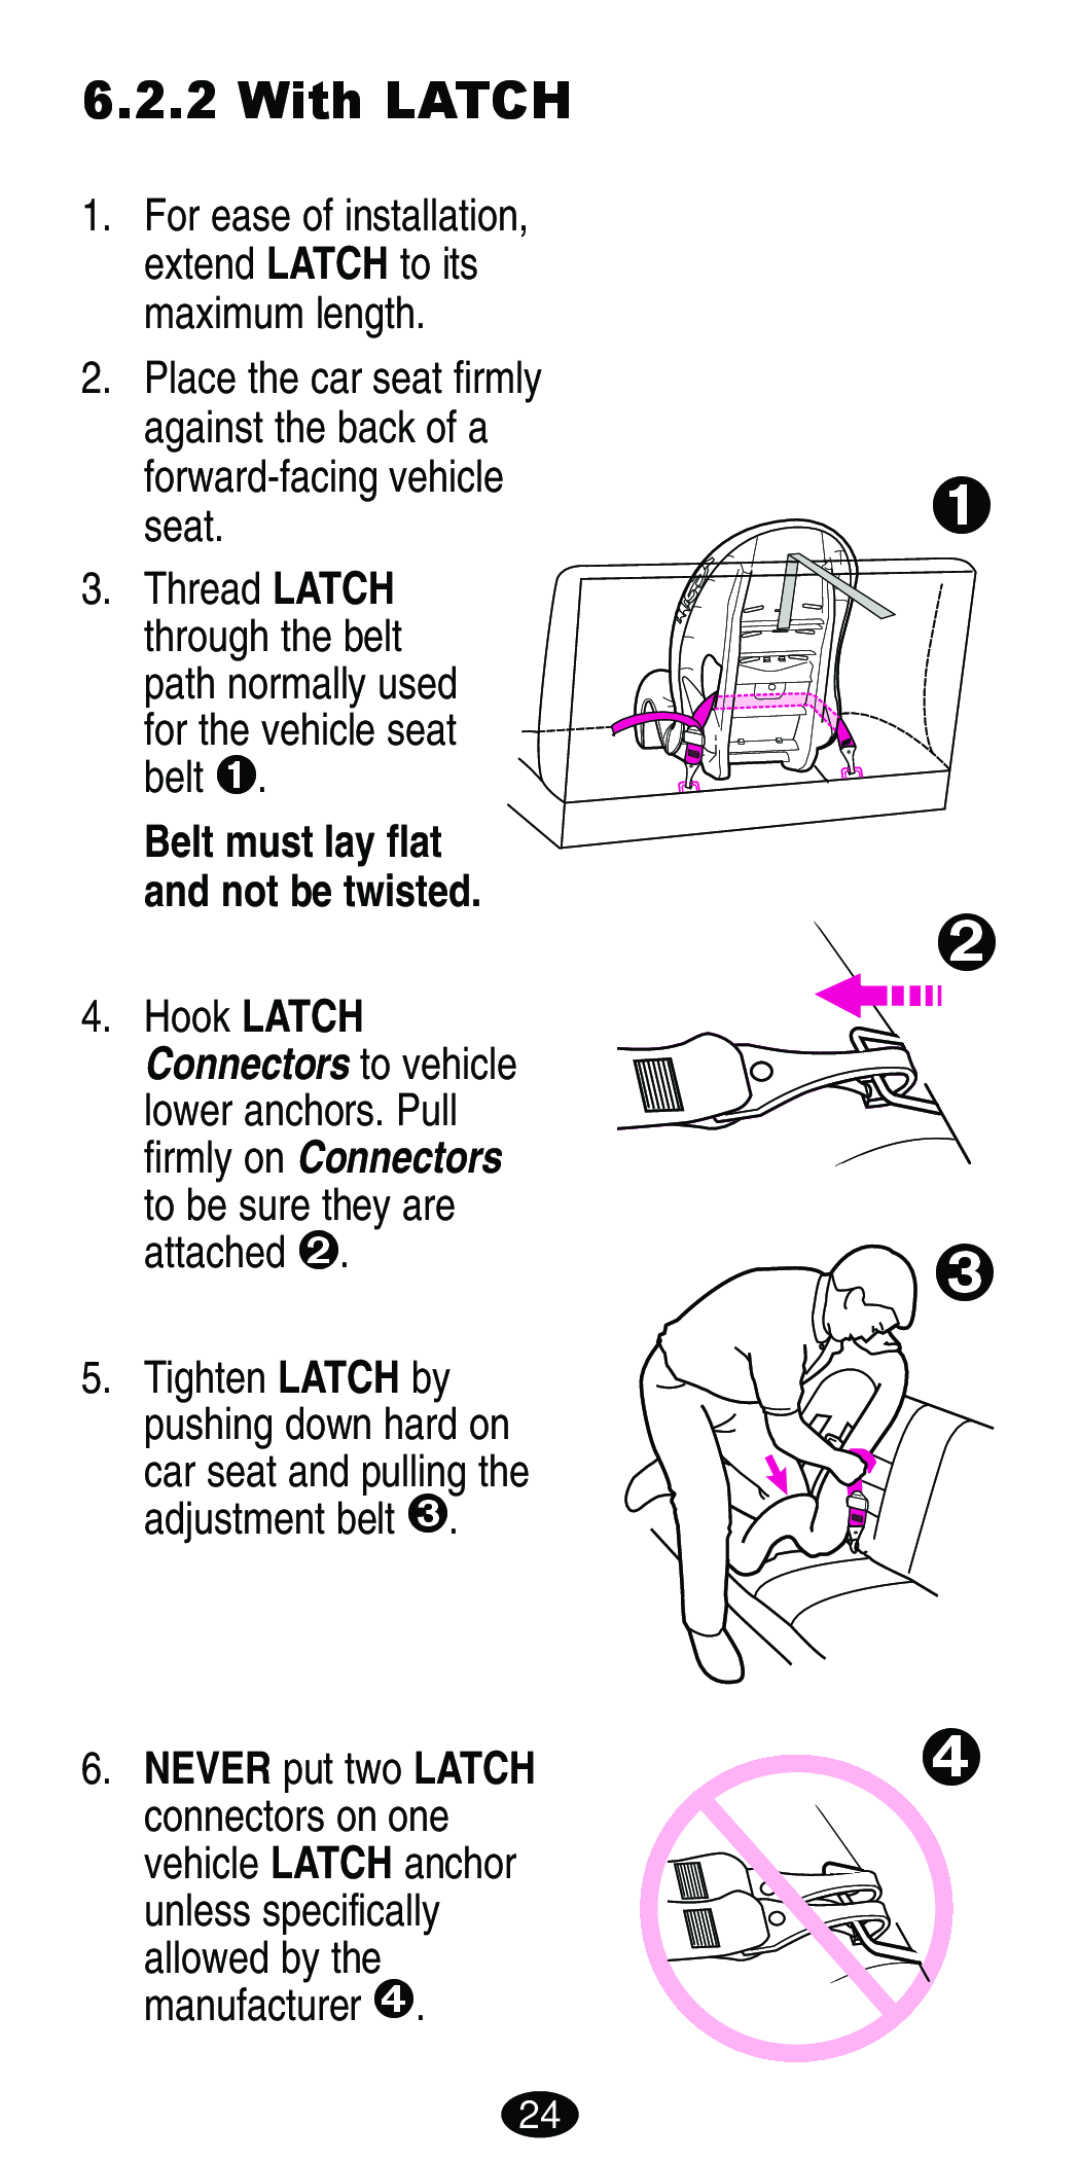 Graco Car Seat/Booster manual ™ š › œ, With LATCH, Thread LATCH, Hook LATCH, Belt must lay flat and not be twisted 